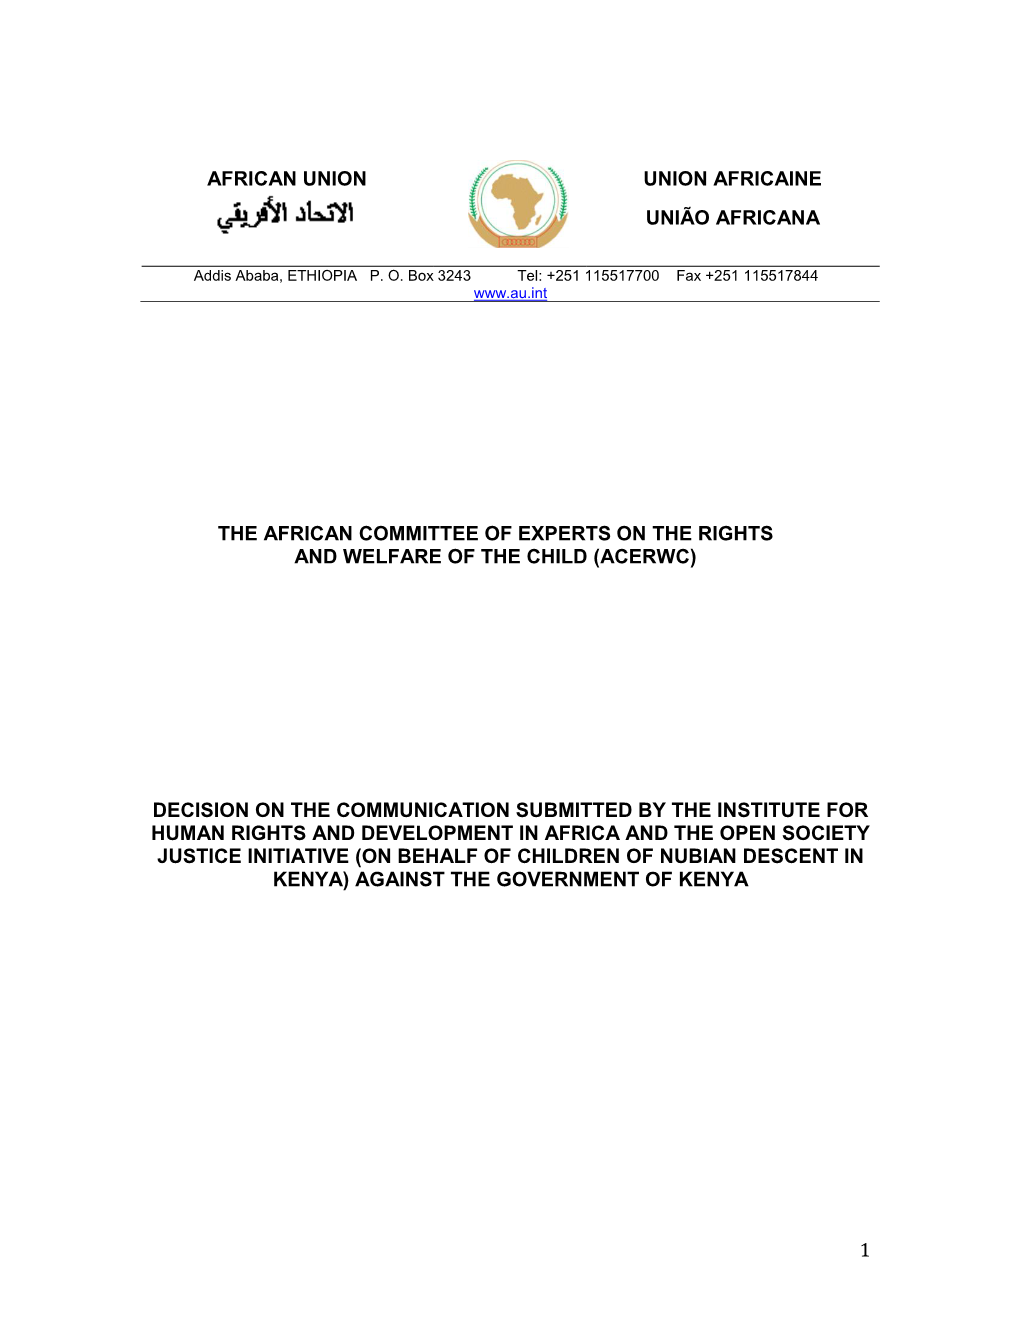 The African Committee of Experts on the Rights and Welfare of the Child (Acerwc)